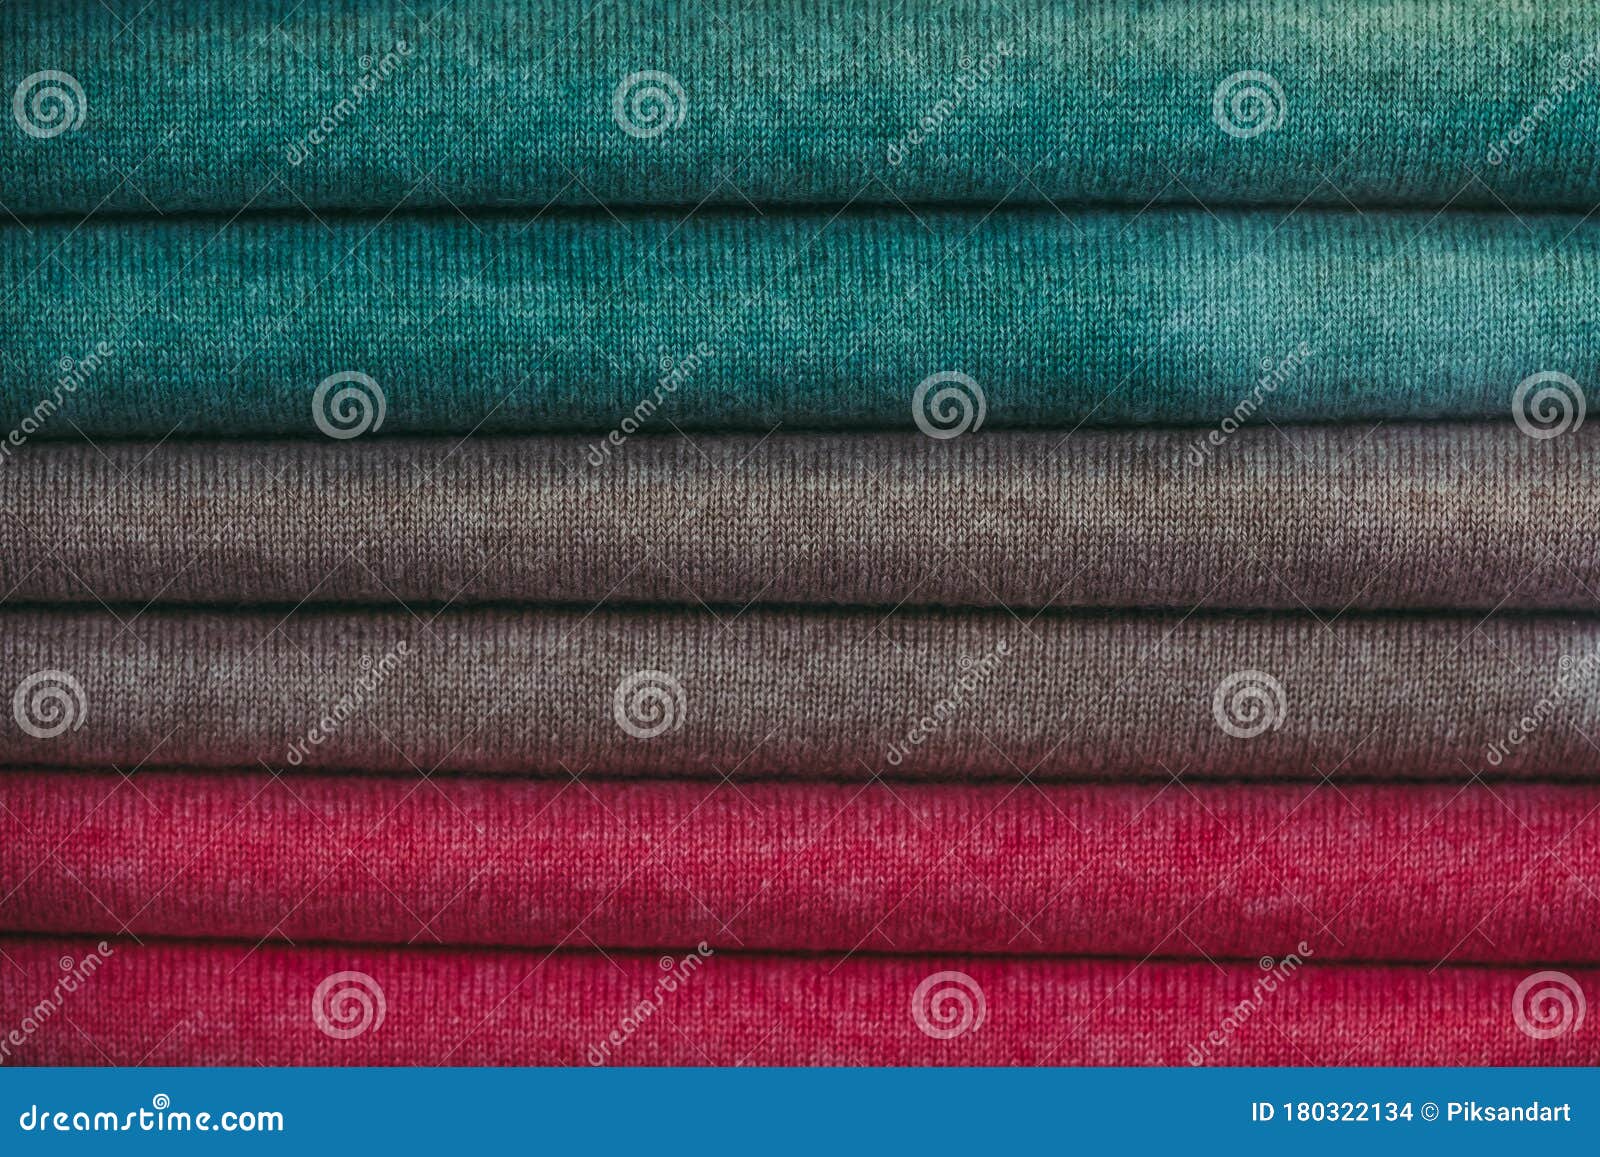 Brightly Colored Wool Lines Background Stock Photo - Image of textile ...